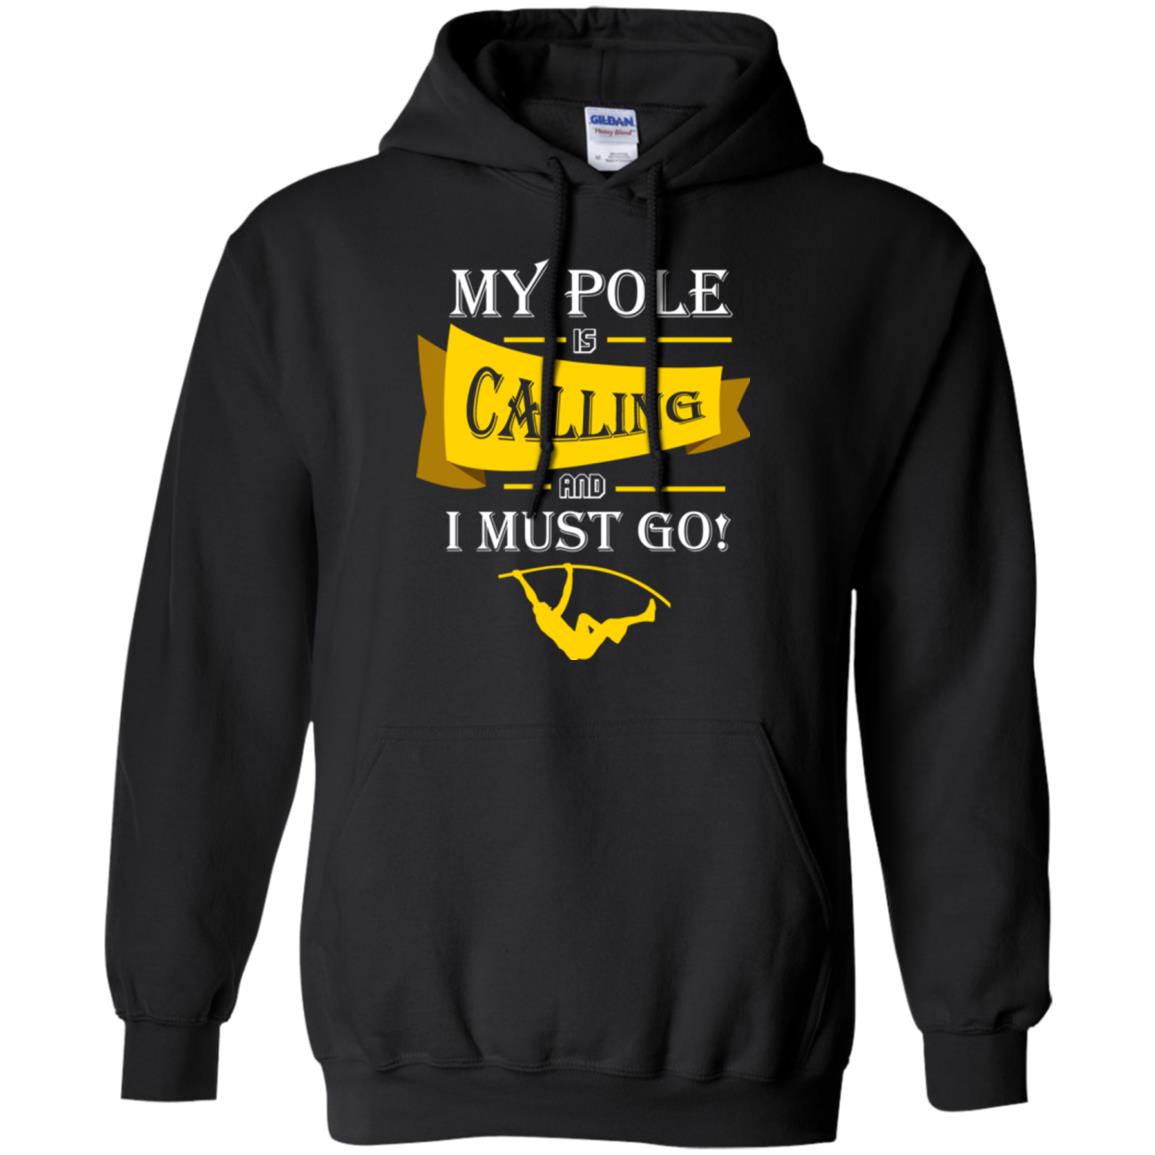 Pole Vault T-shirt My Pole Is Calling And I Must Go